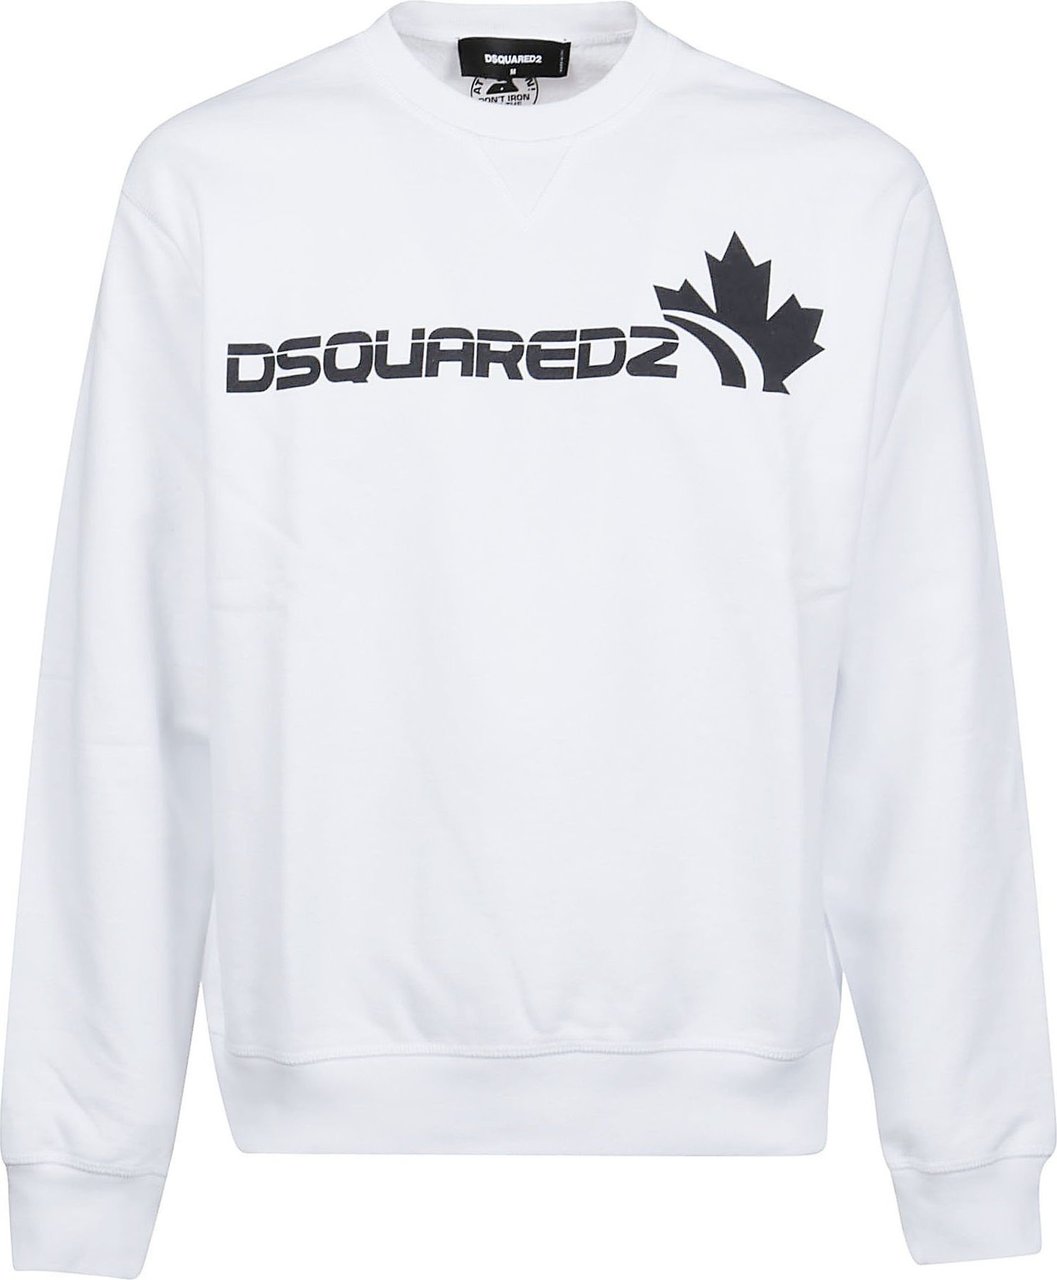 Dsquared2 Cool Fit Sweatshirt White Wit